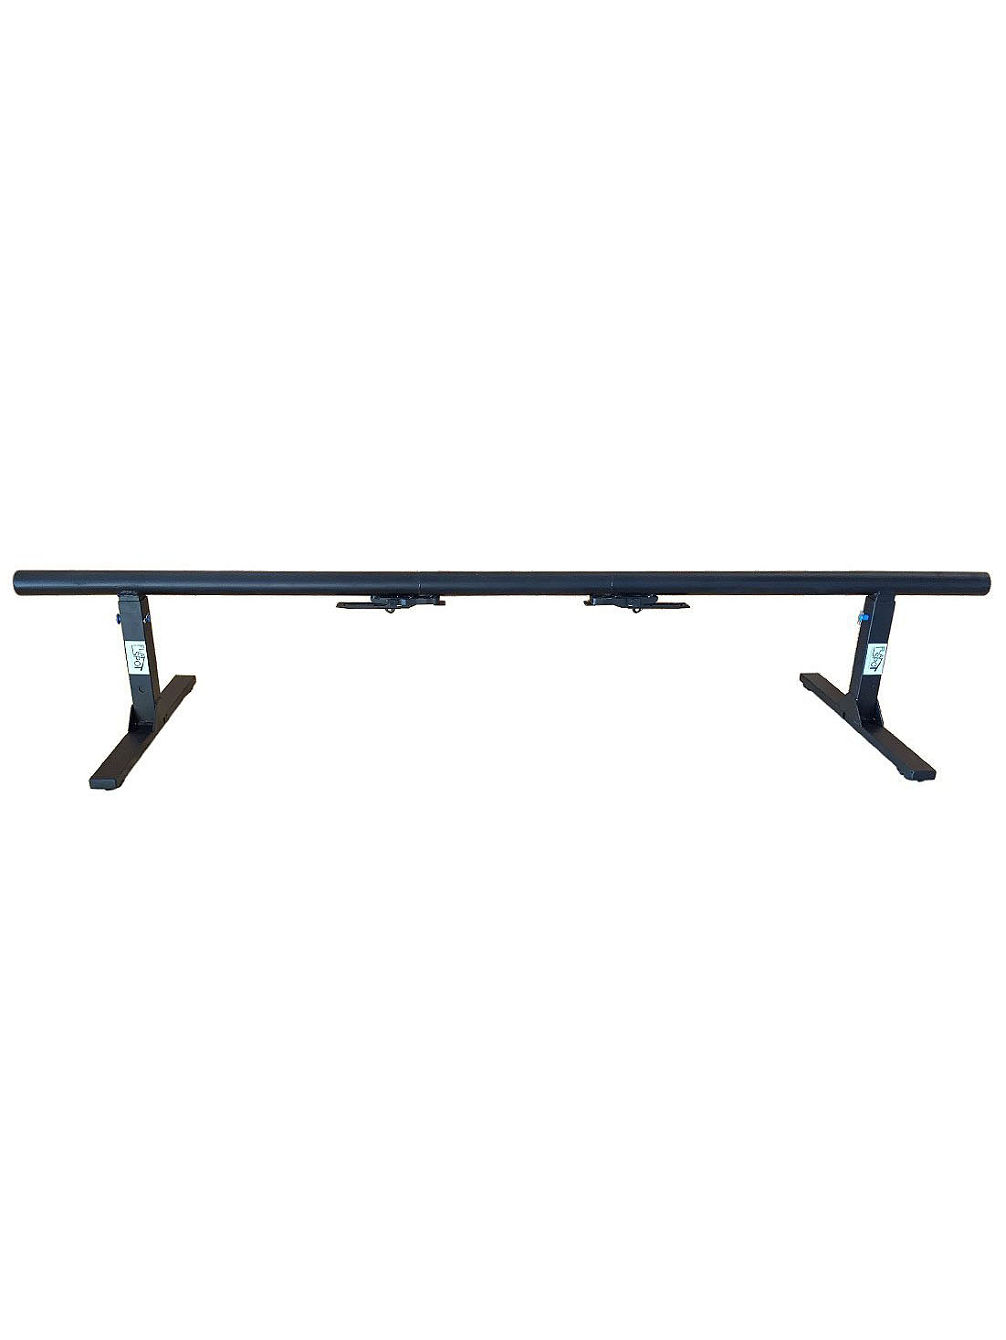 Skate Obstacle Flat Top Rail To Go Round Black